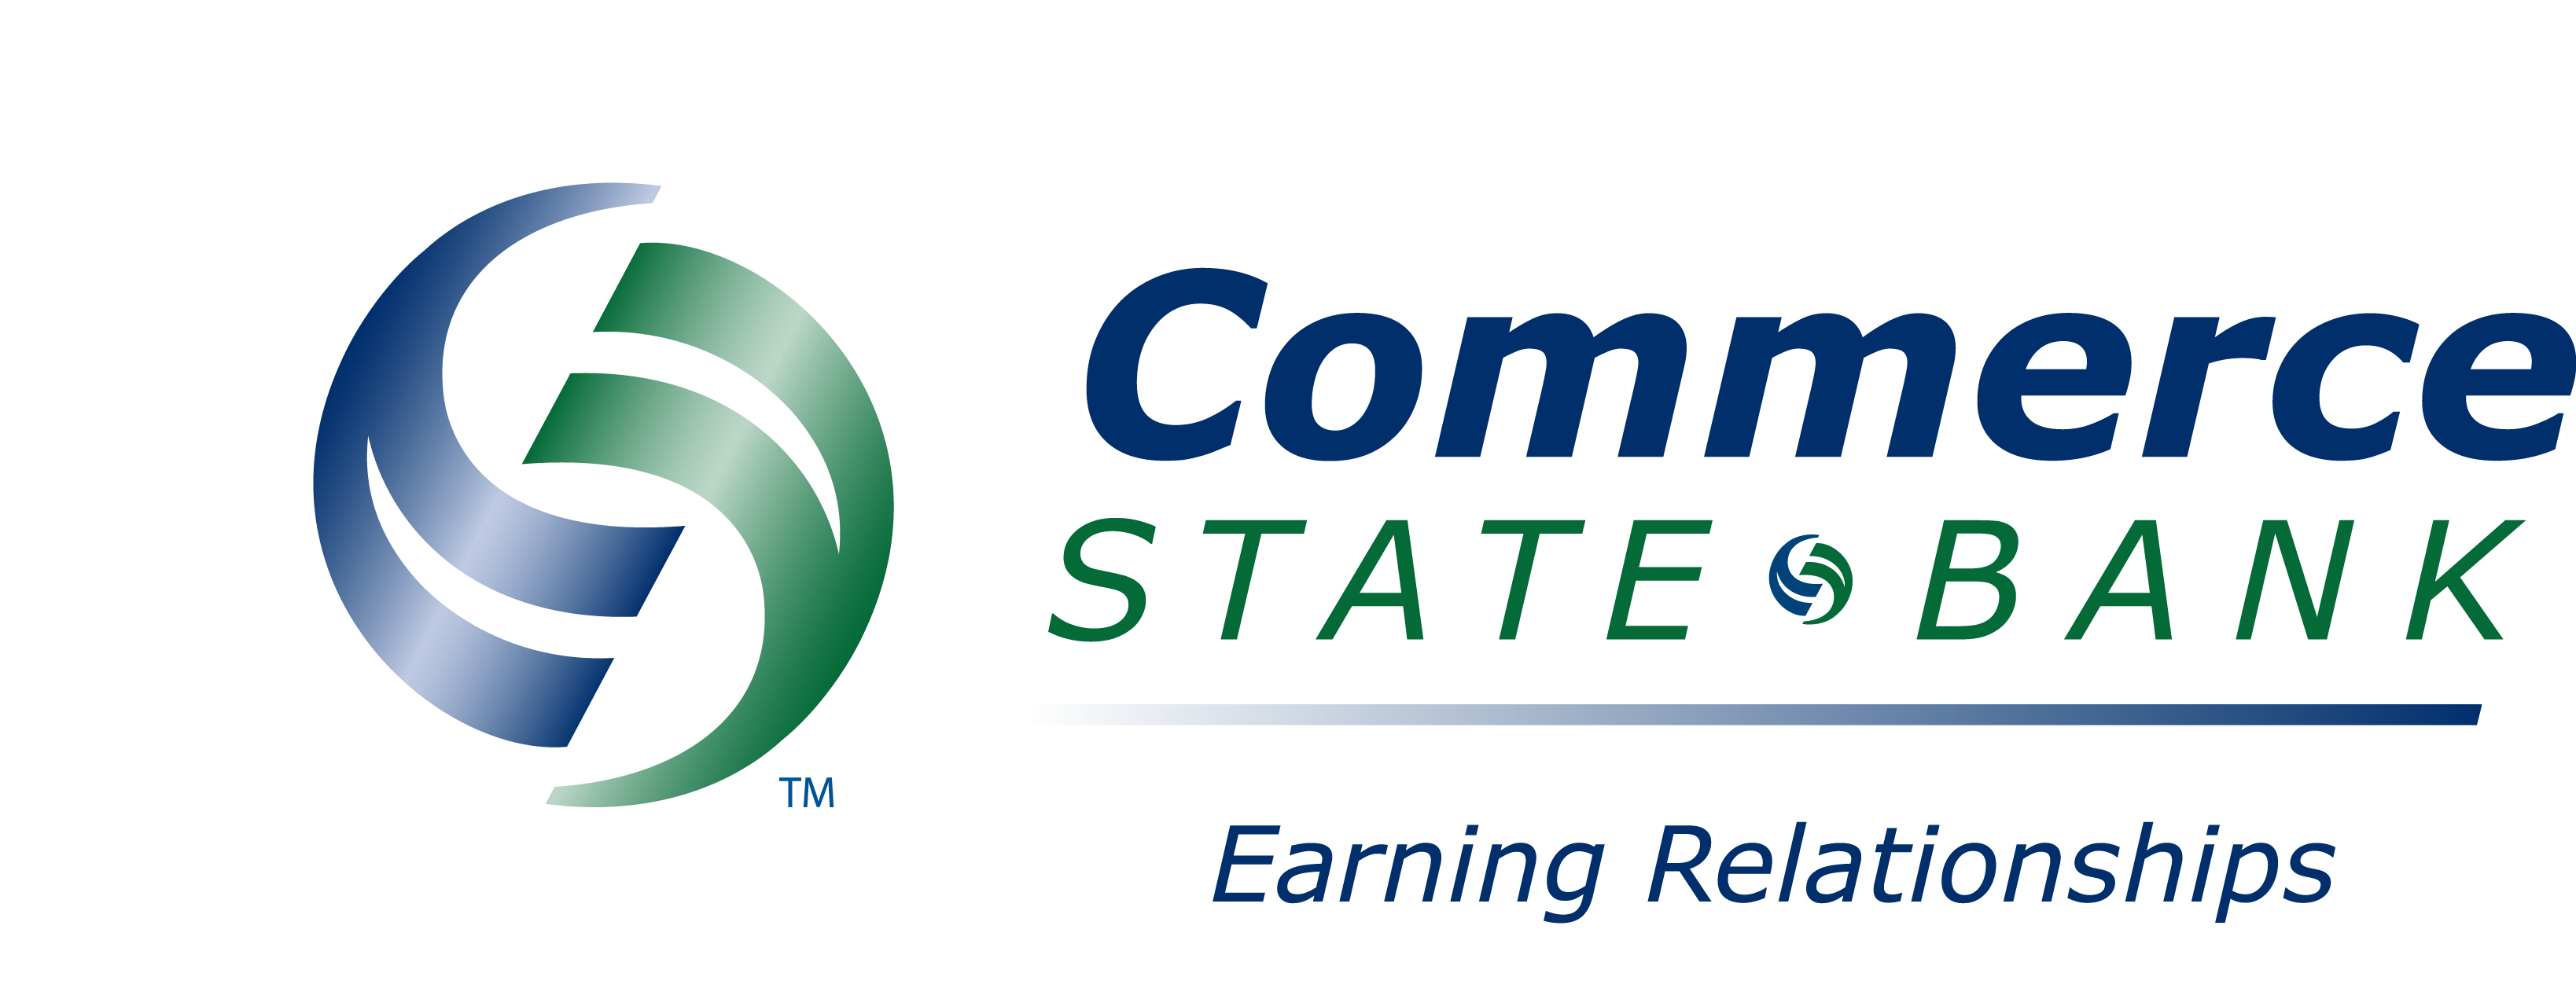 Commerce State Bank Company Logo